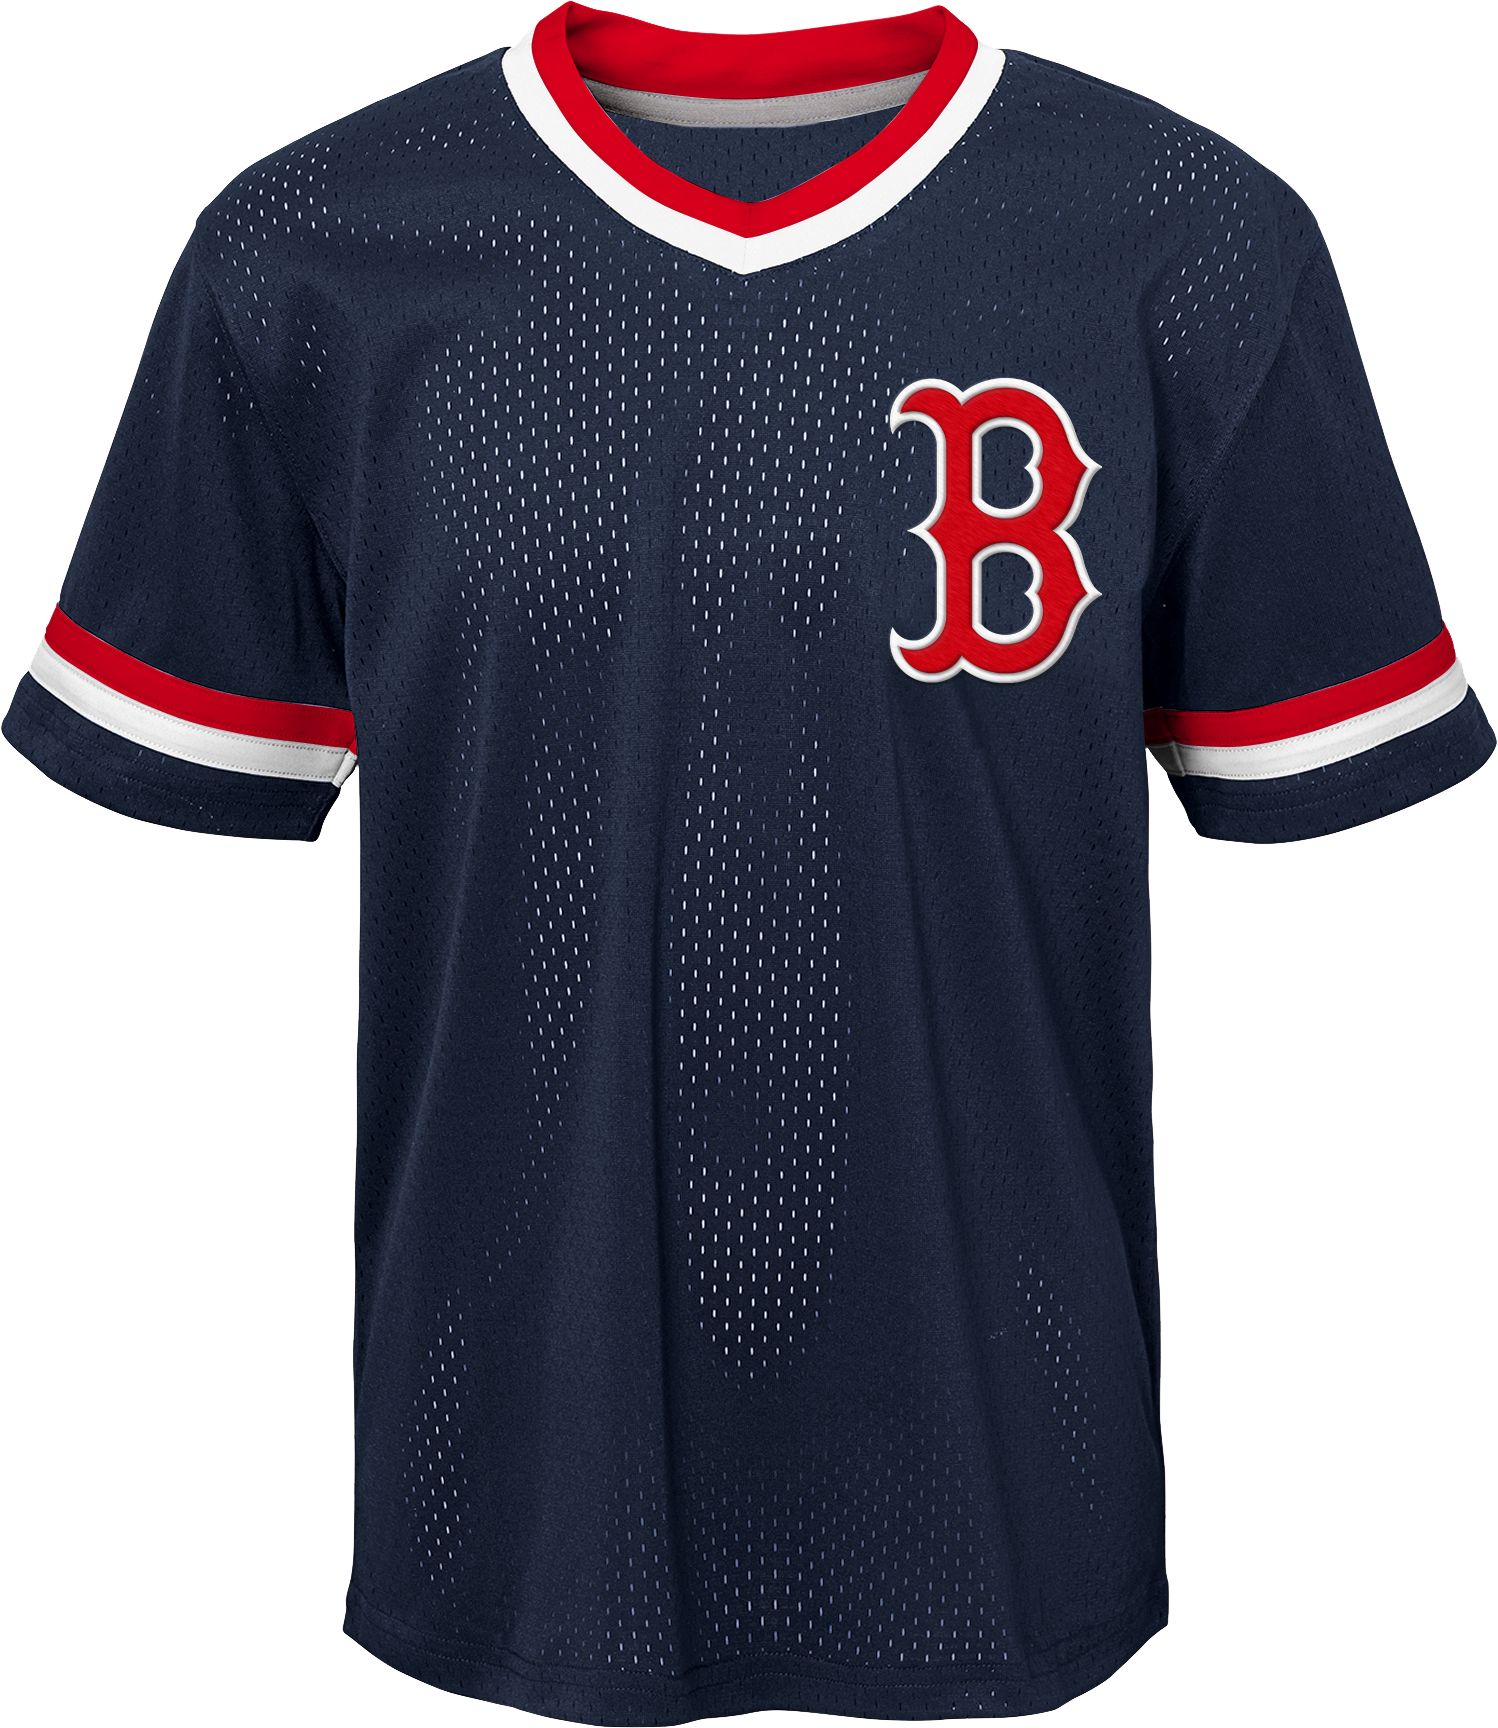 red sox jersey kids